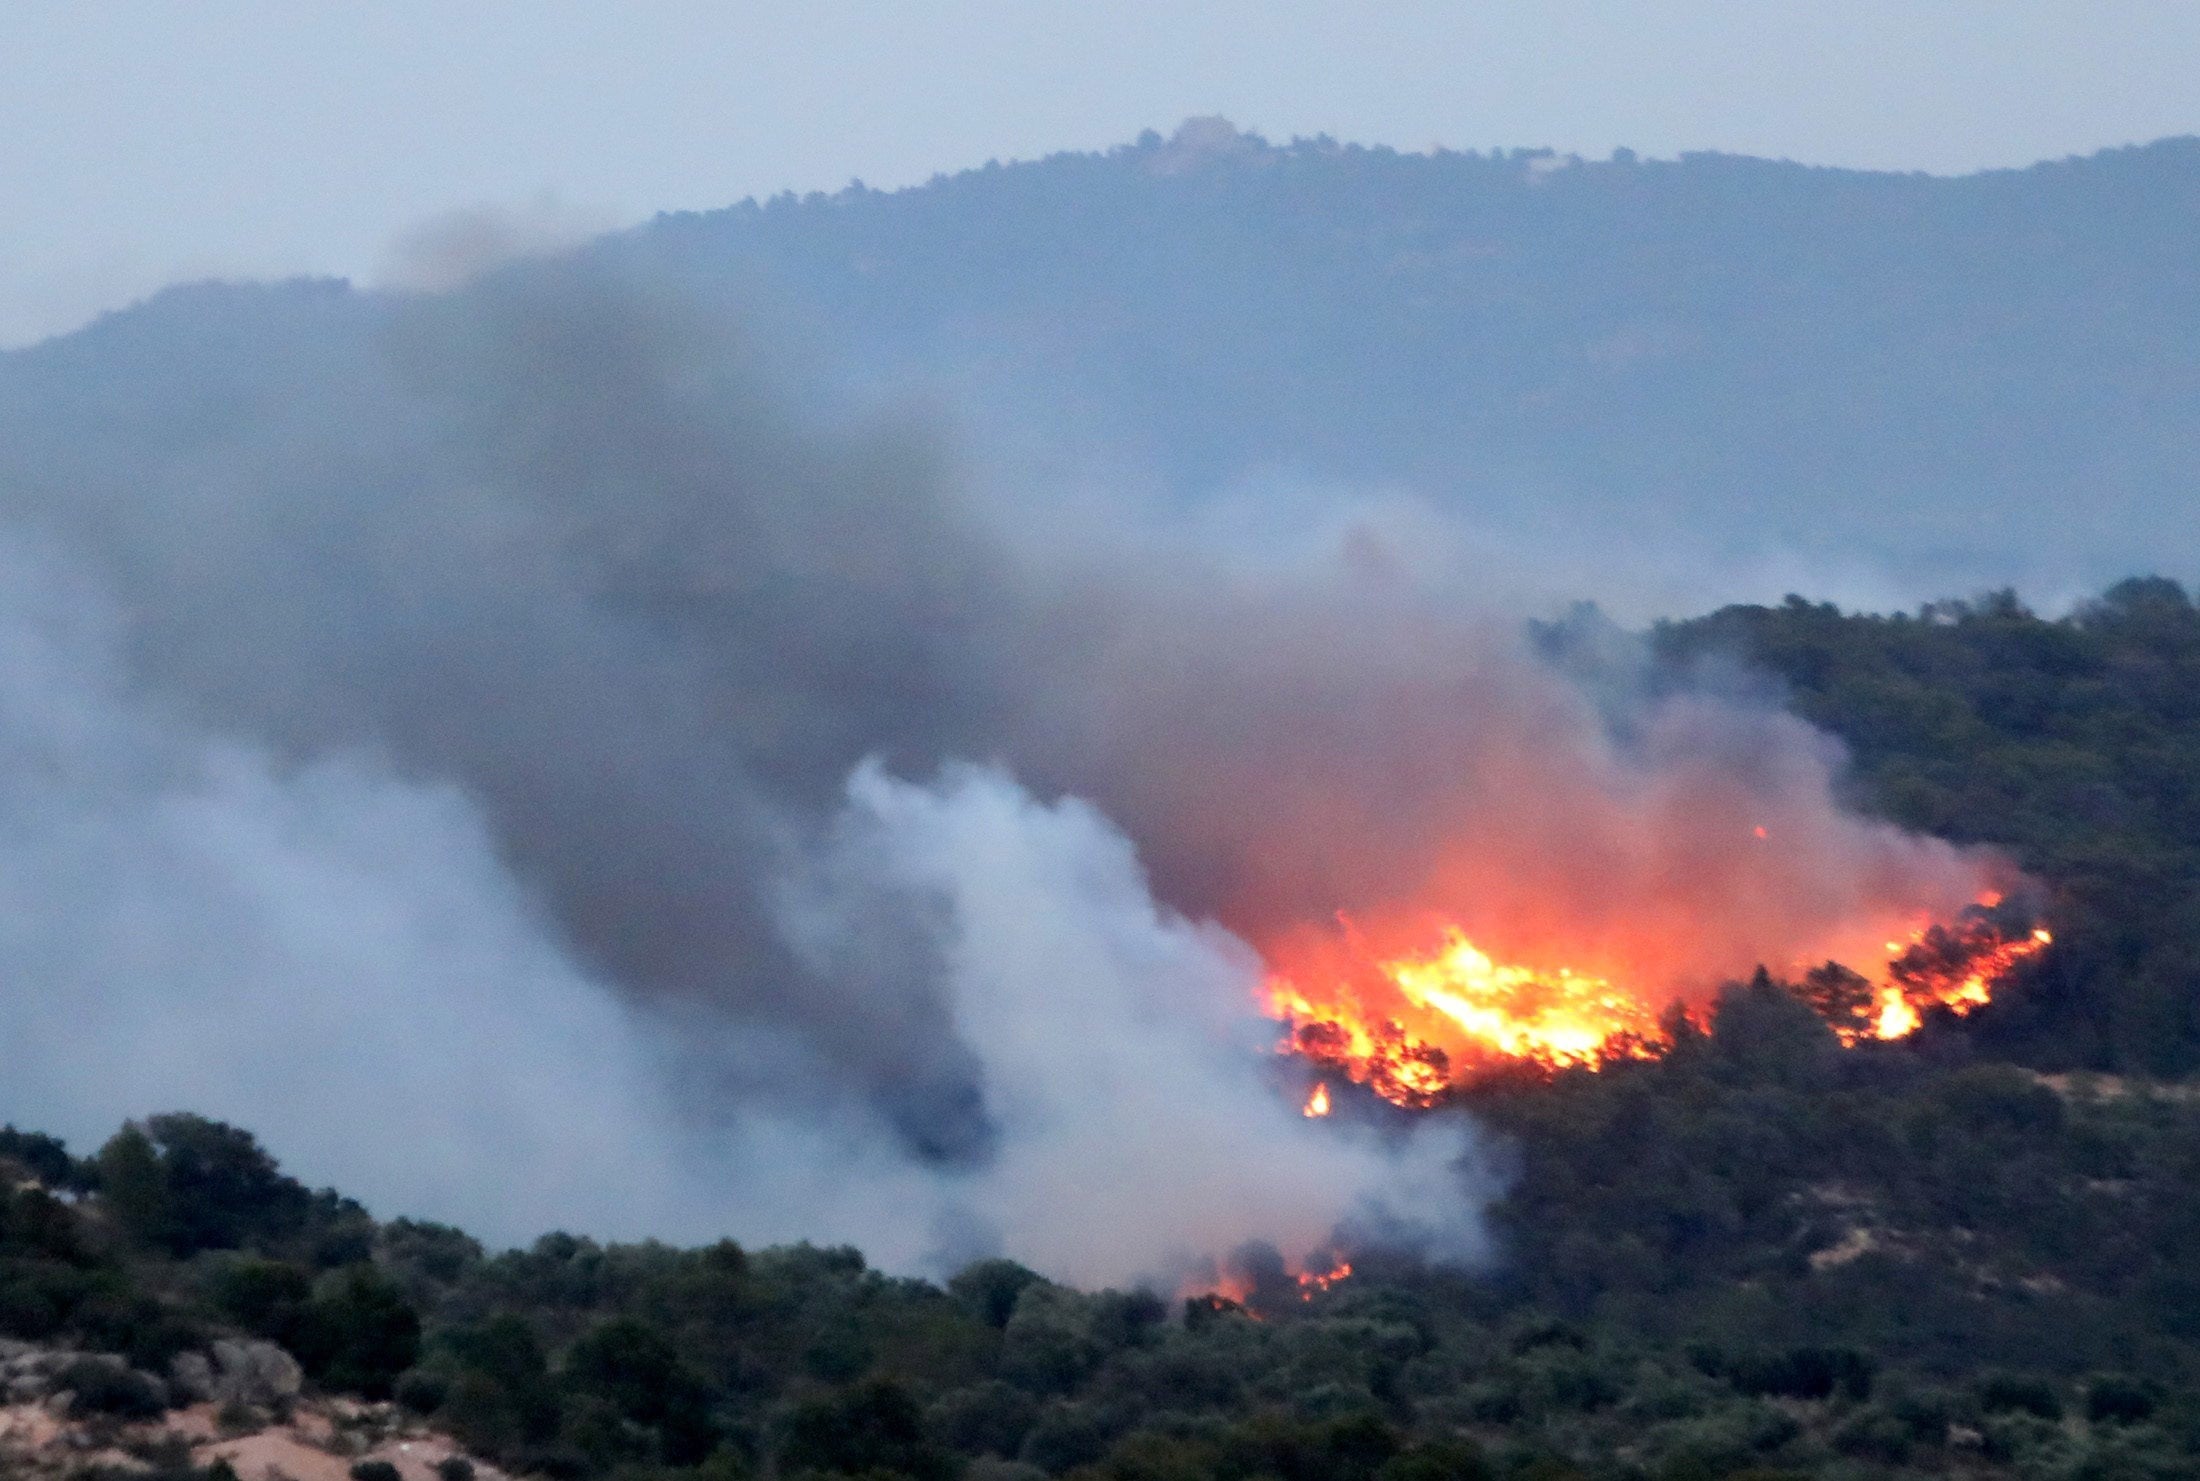 A forest fire burns in Tarragona, Catalonia, as temperatures continue to soar across Europe